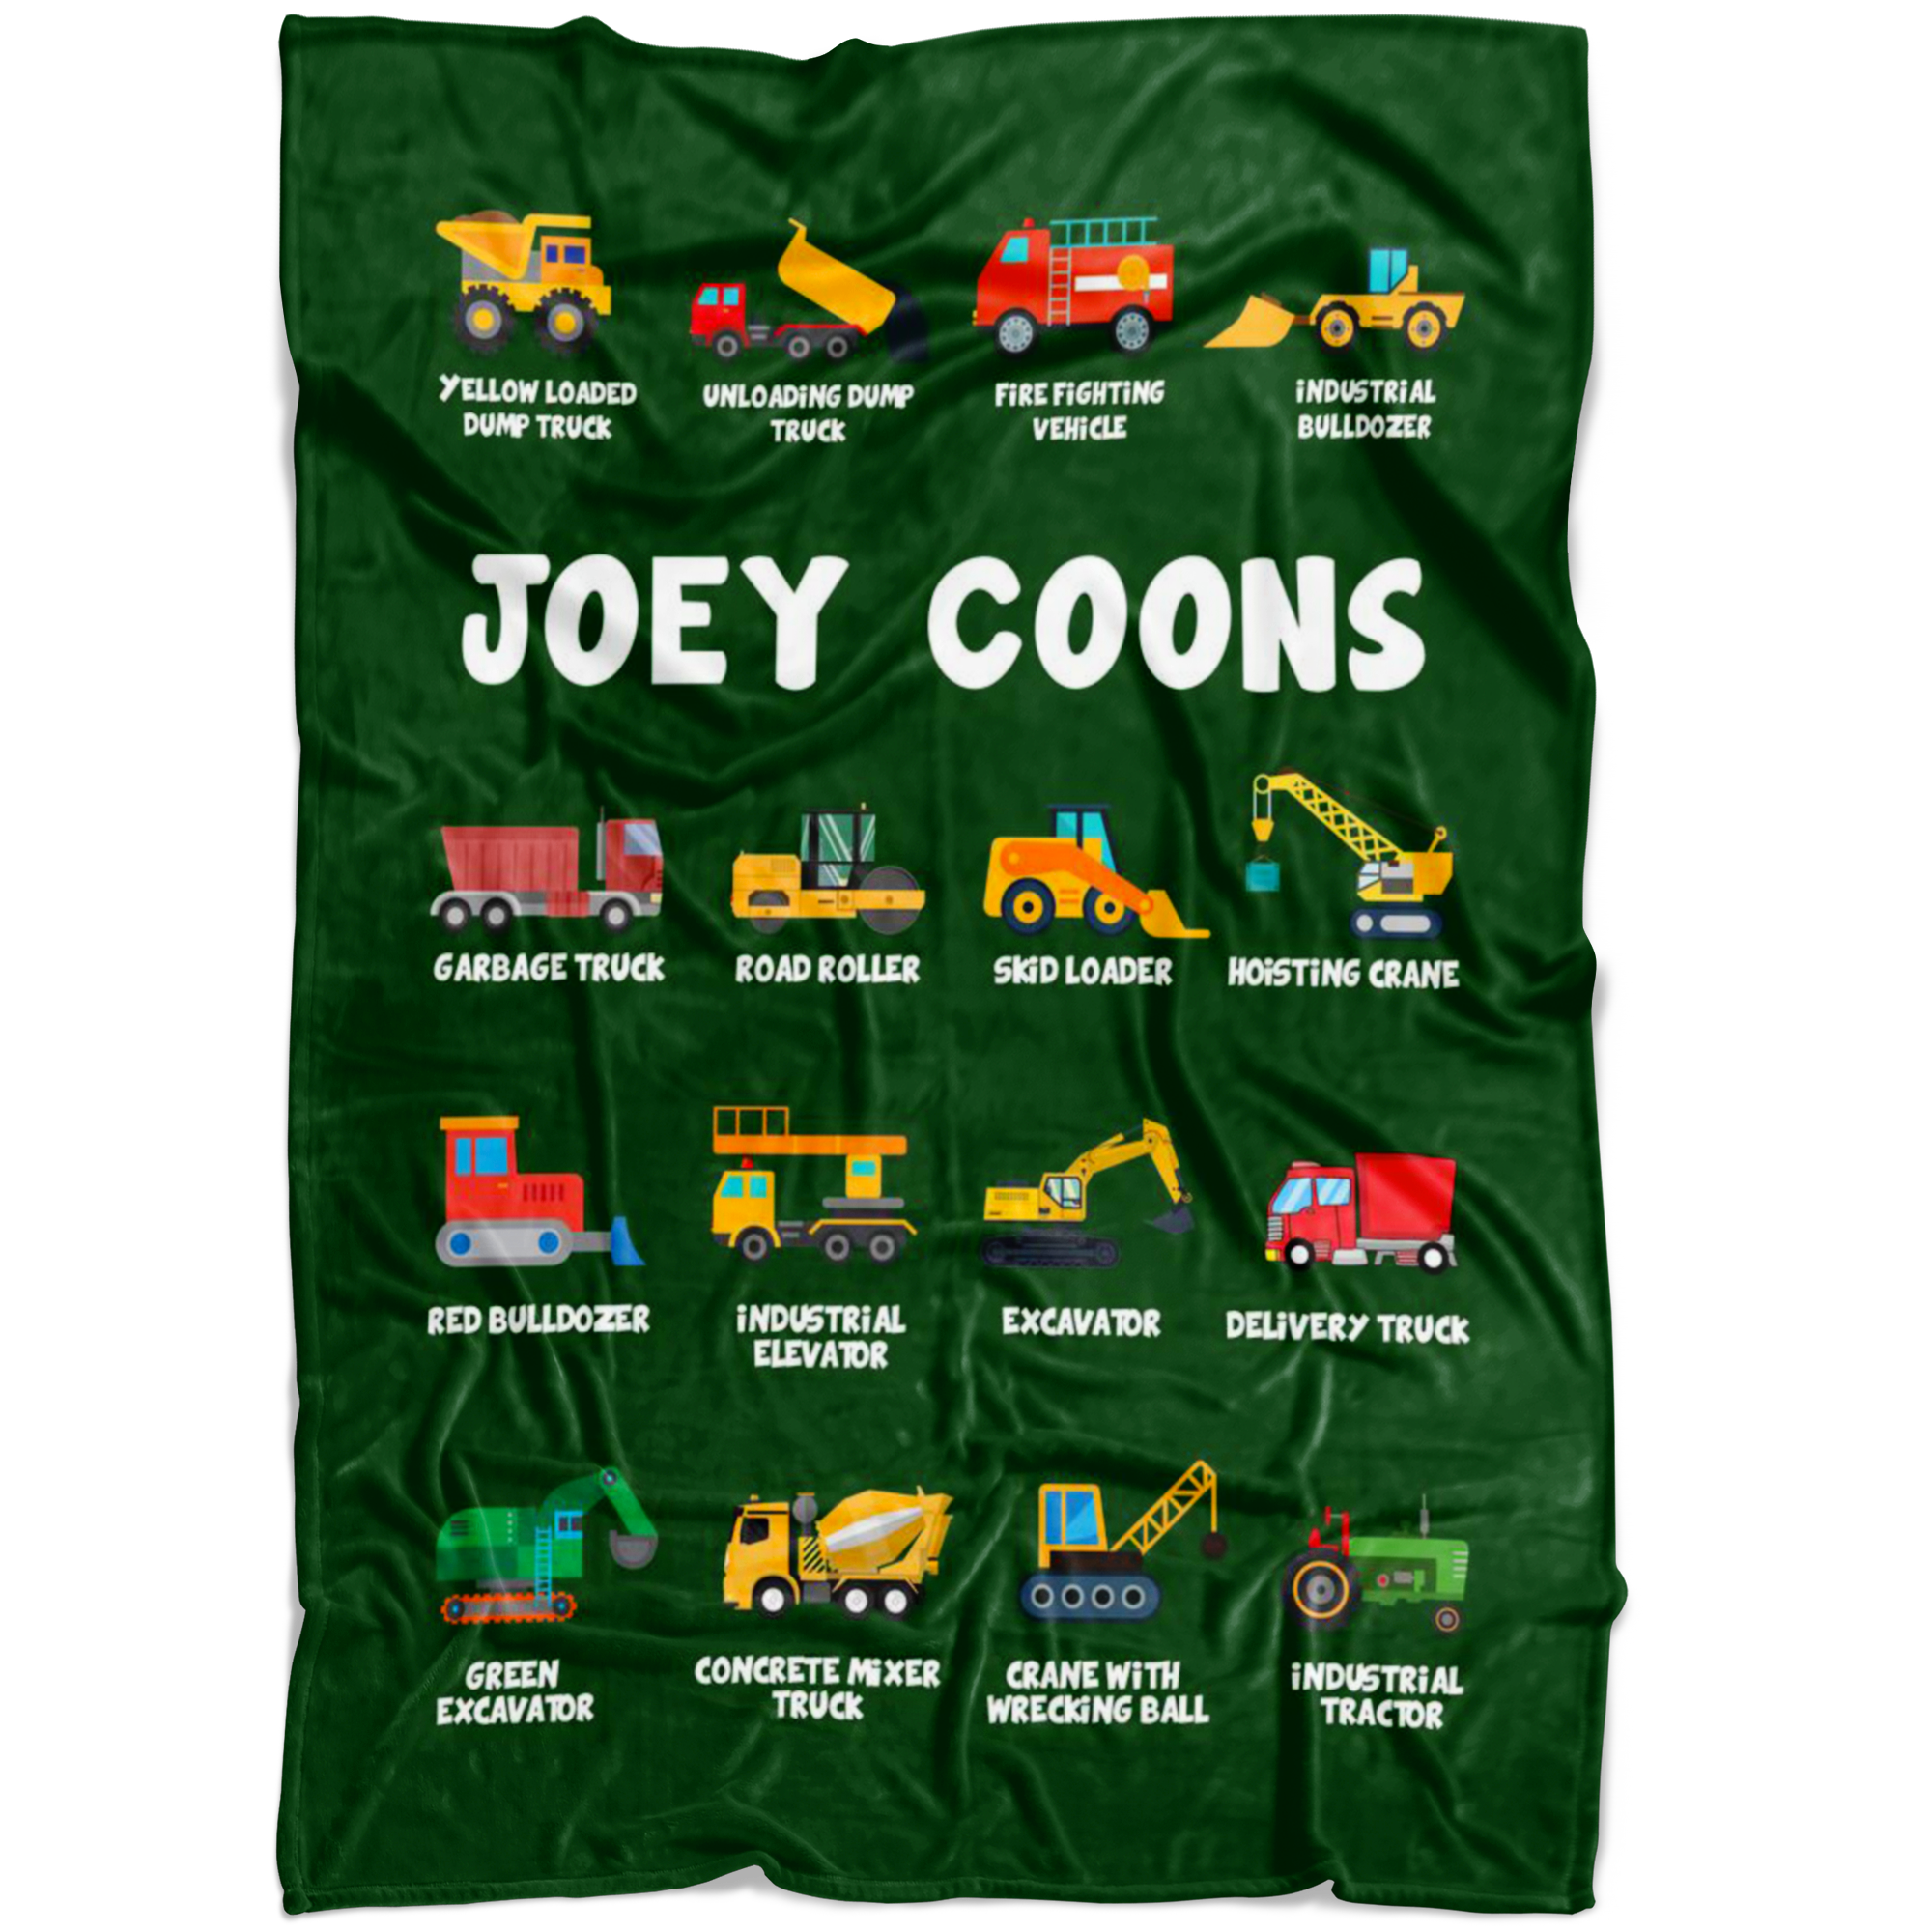 Joey coons Construction Blanket Green